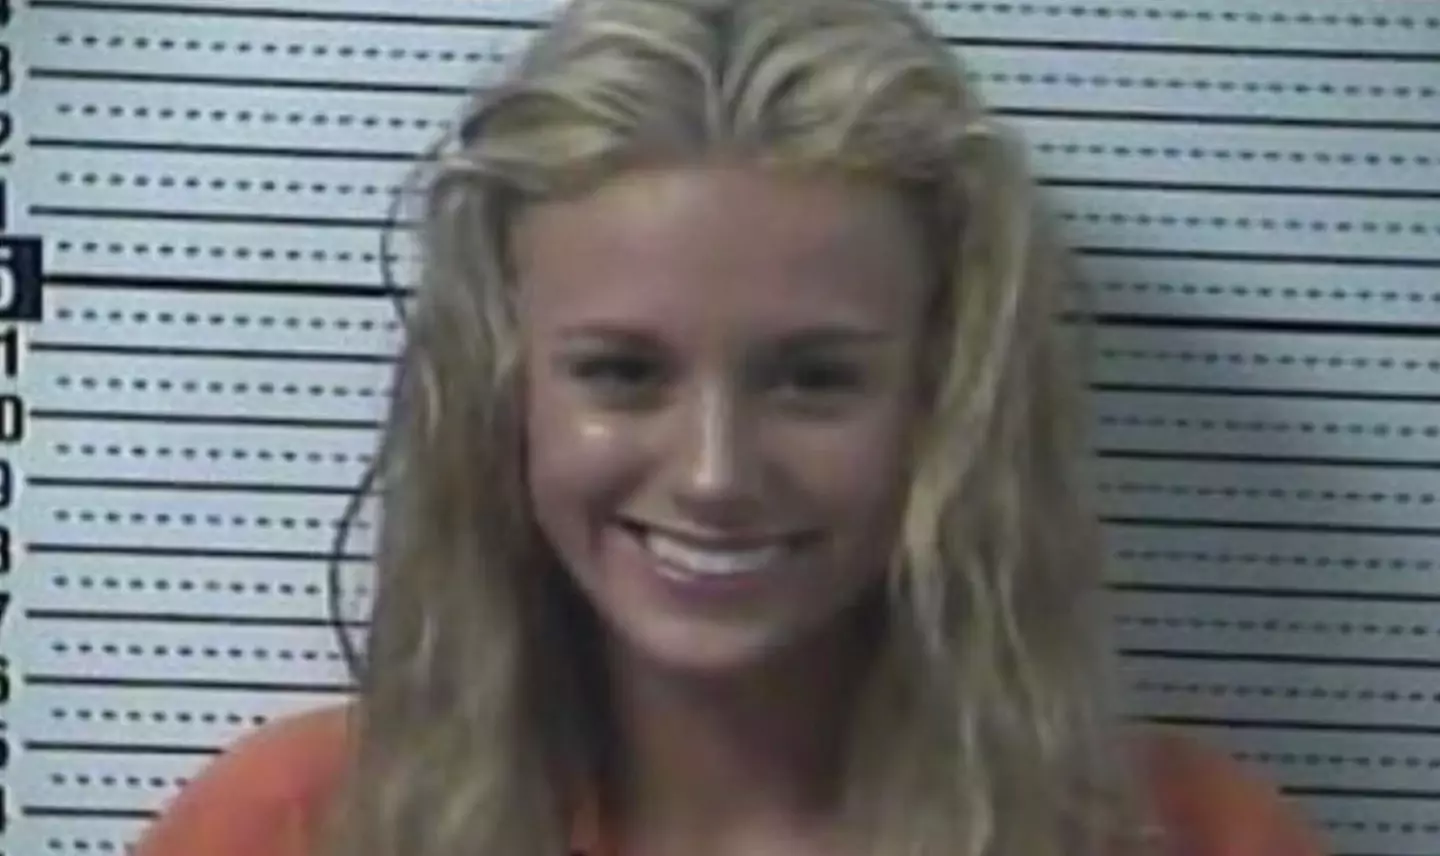 Rayanna has been arrested for the likes of stalking and theft.